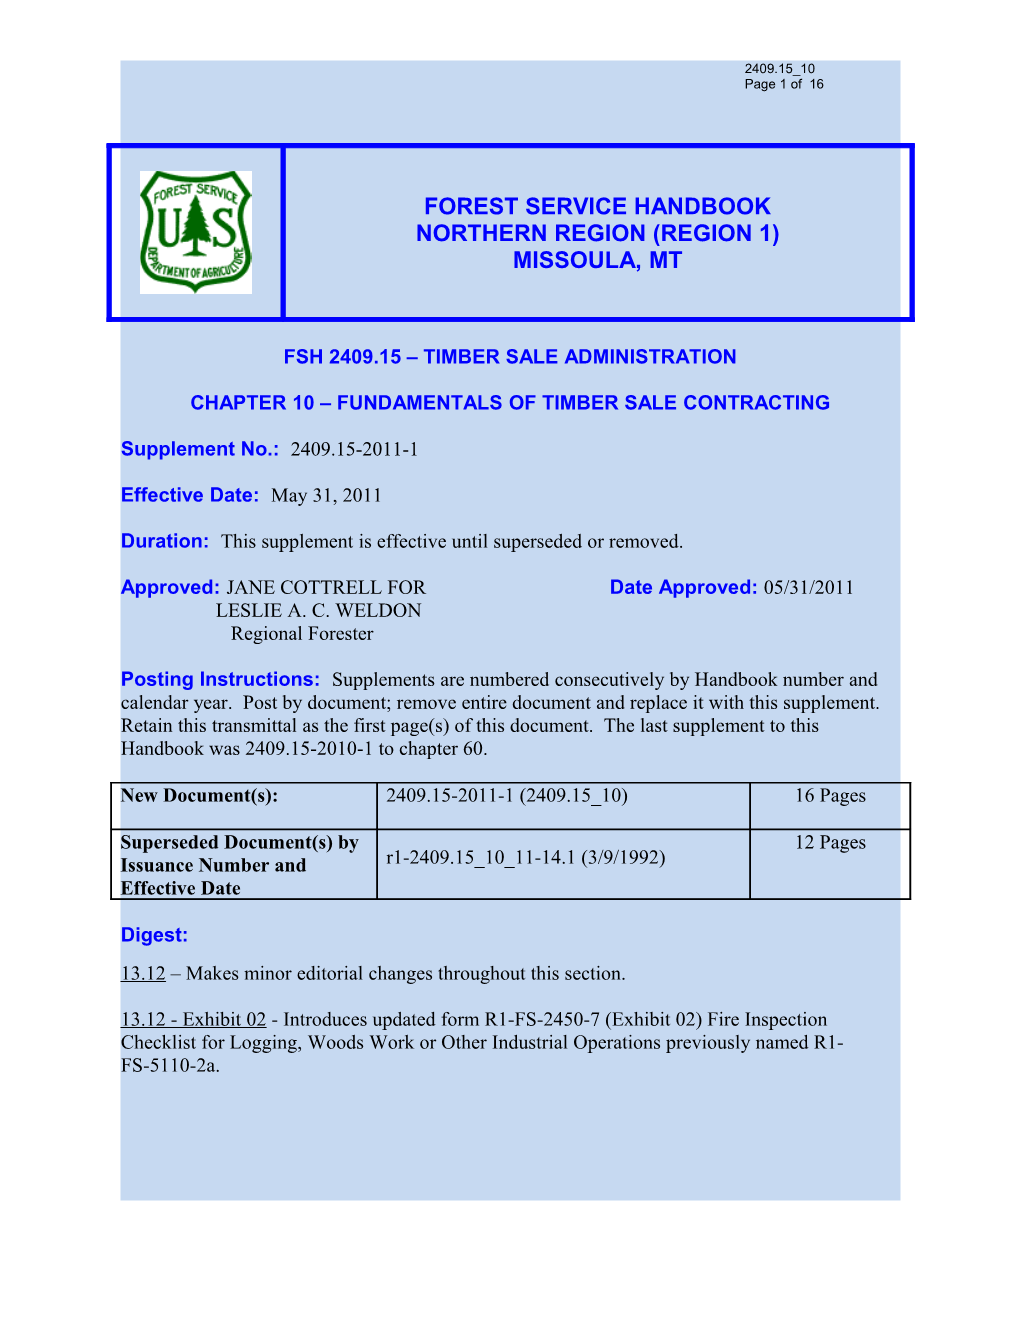 Fsh 2409.15 Timber Sale Administration